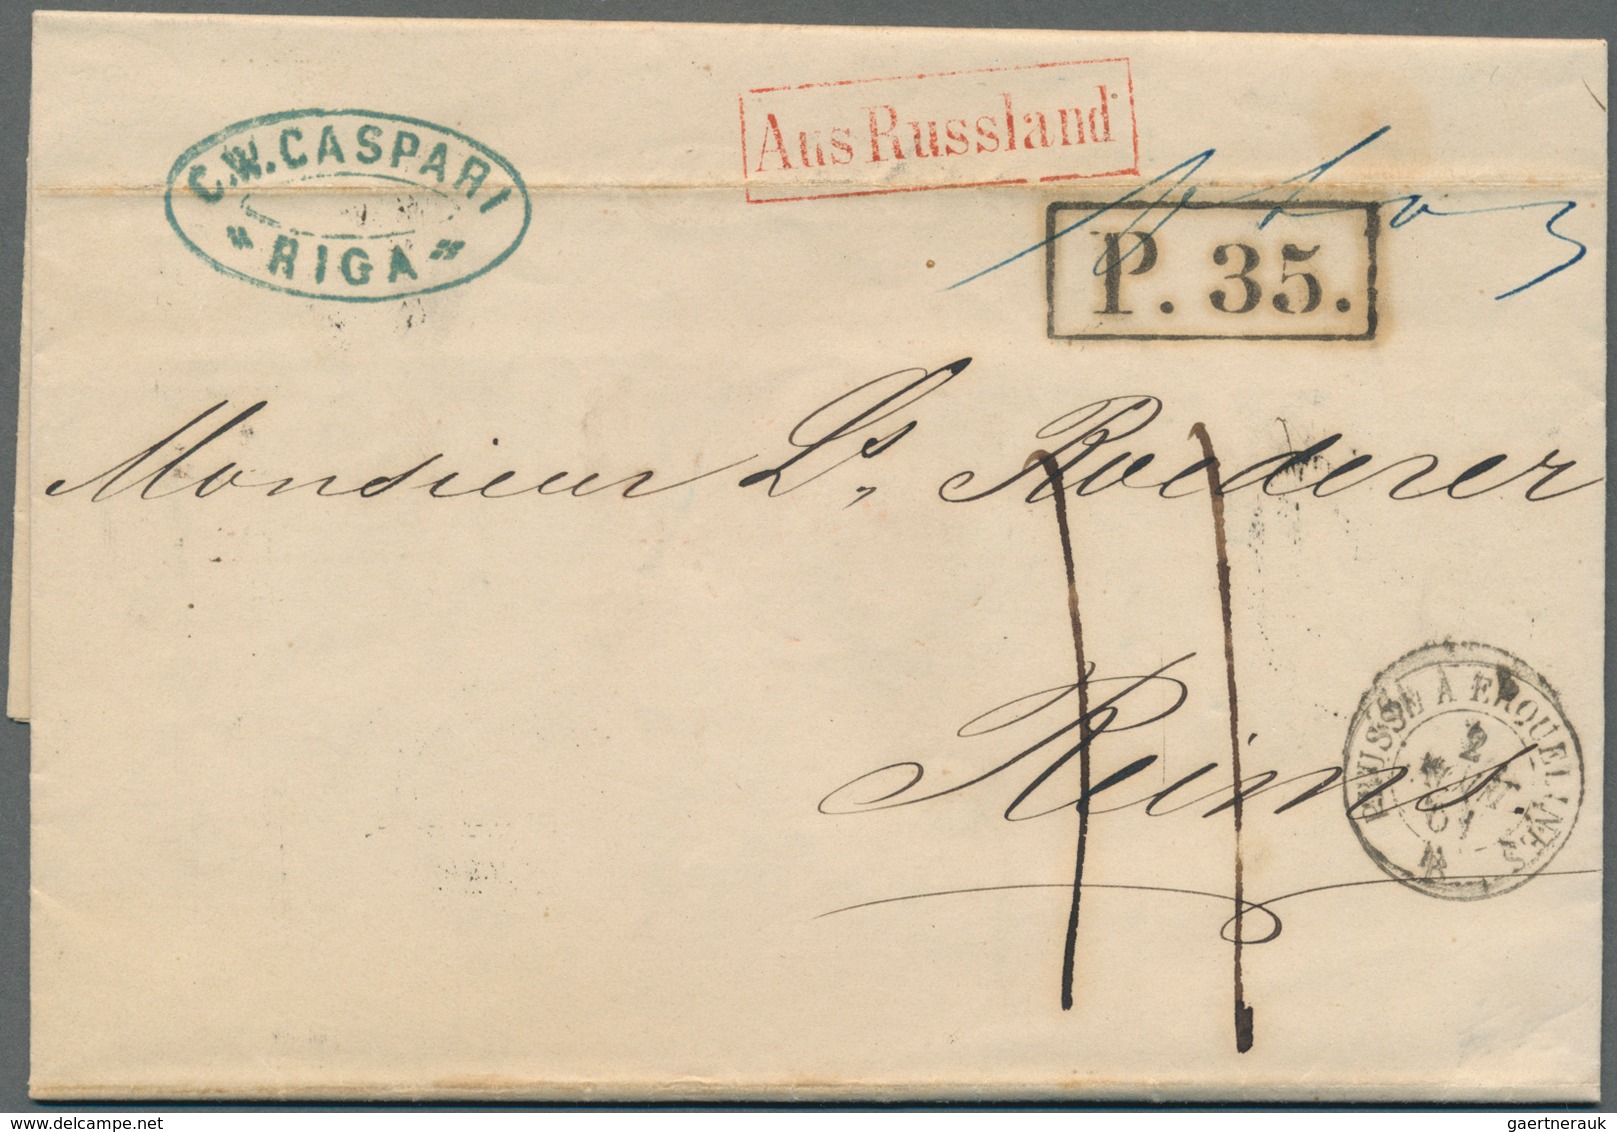 Russland: 1859/1866, six letter sent from RIGA to the Champain dealer "Roederer" in Reims with pruss